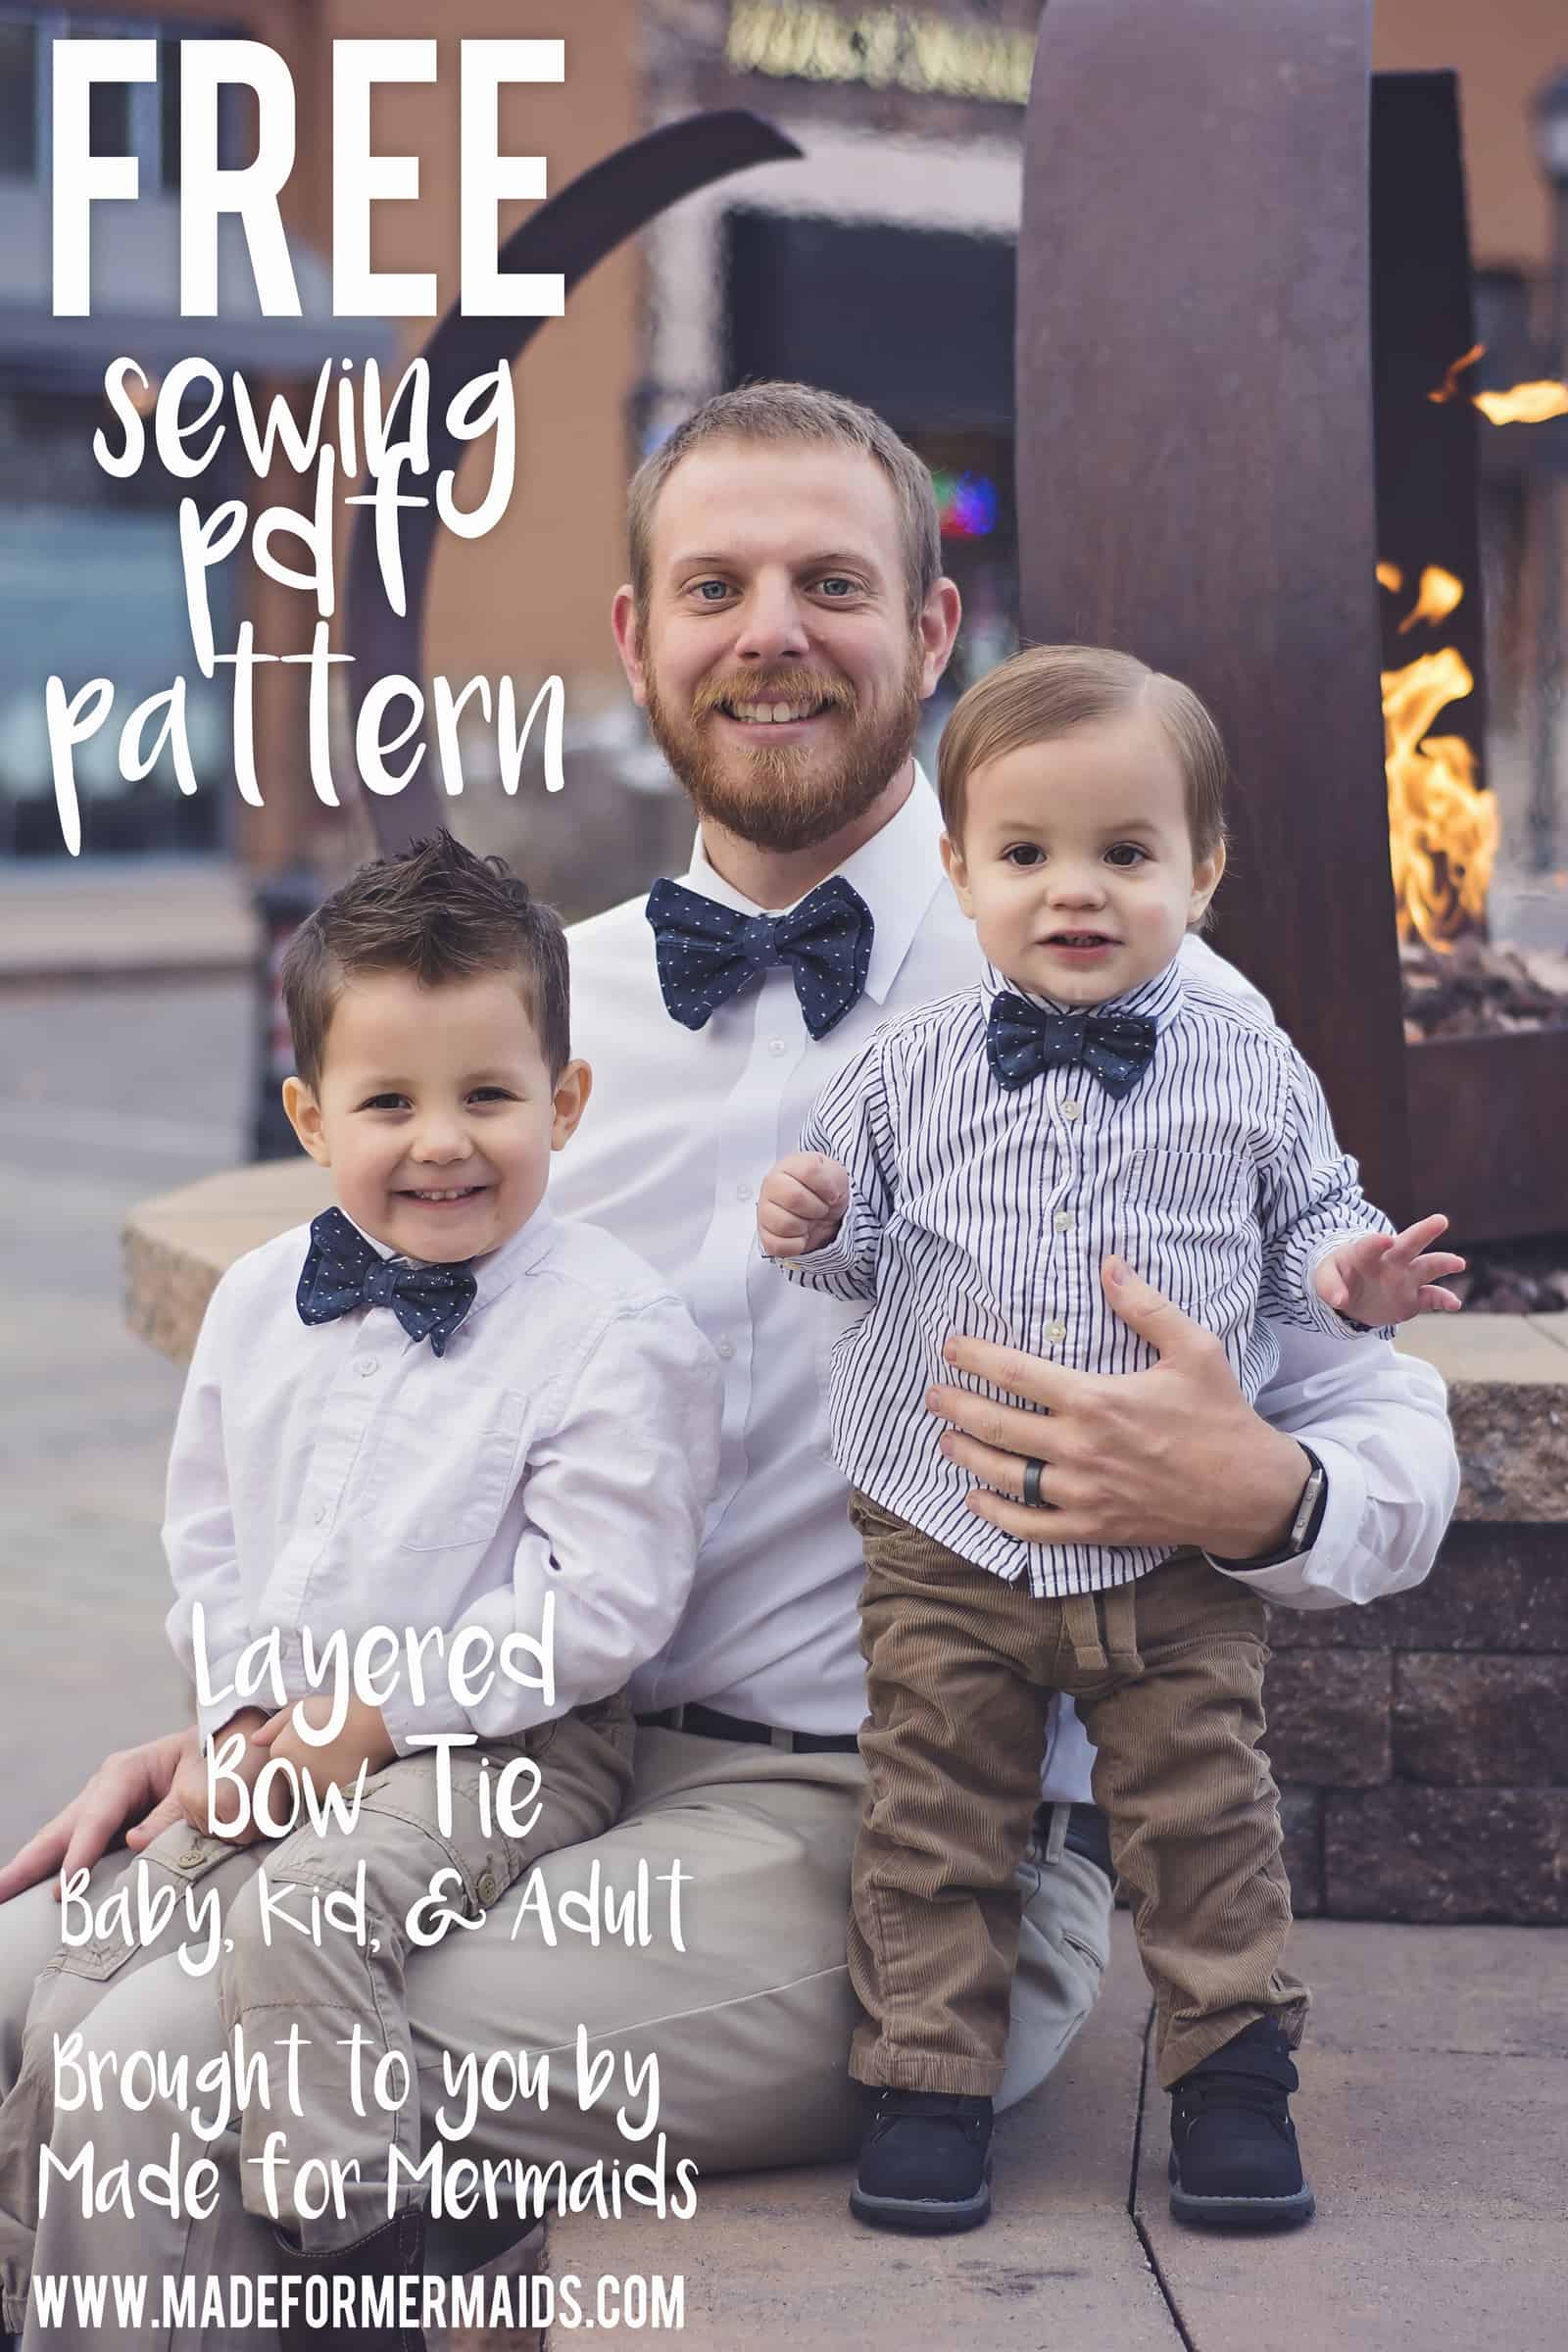 FREE PDF PATTERN- Layered Bow Tie for Baby, Kids & Adults